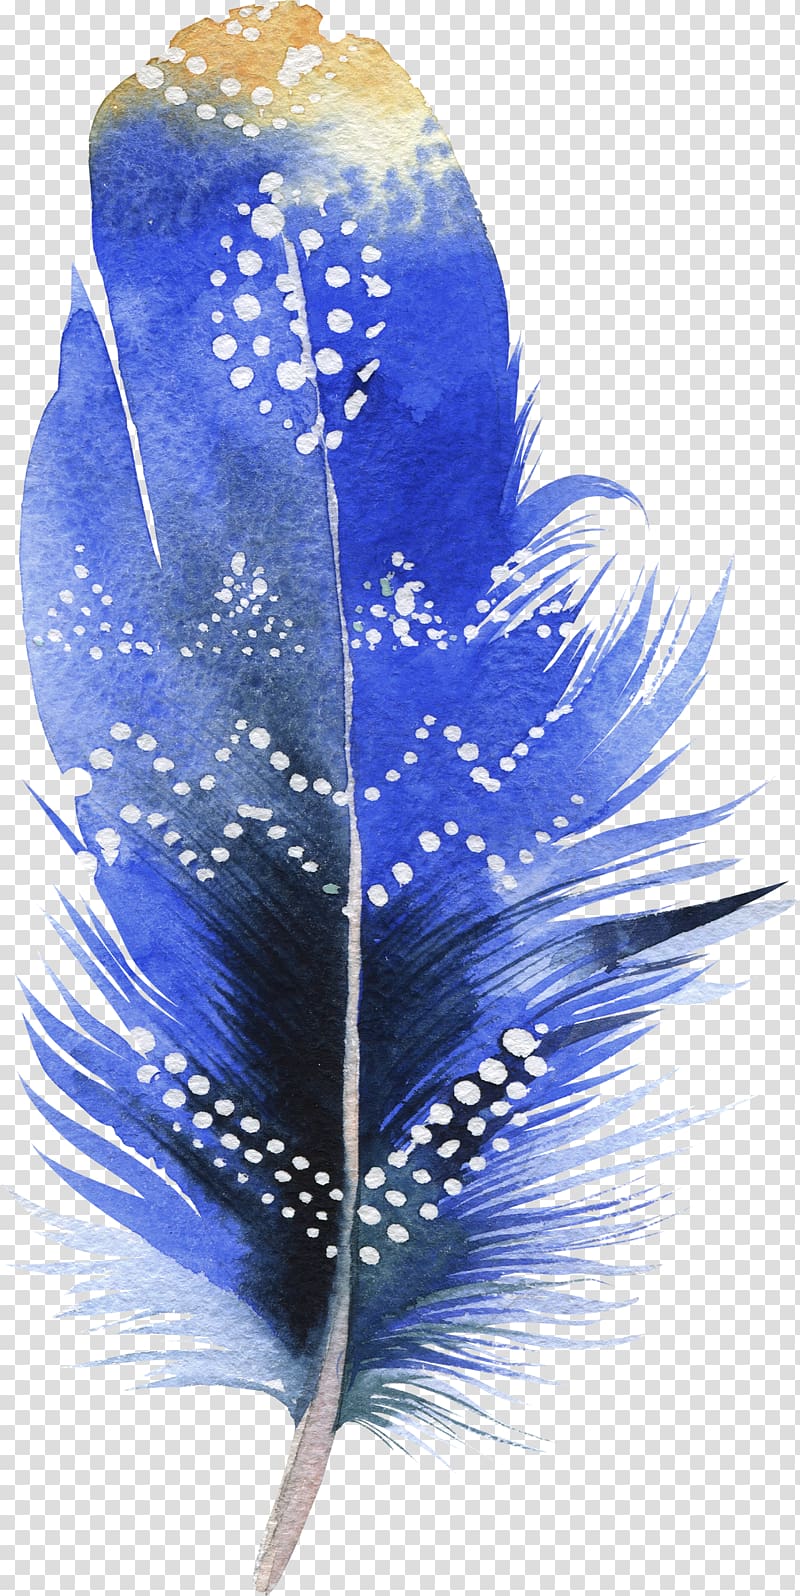 Feather Drawing Image - Drawing Skill